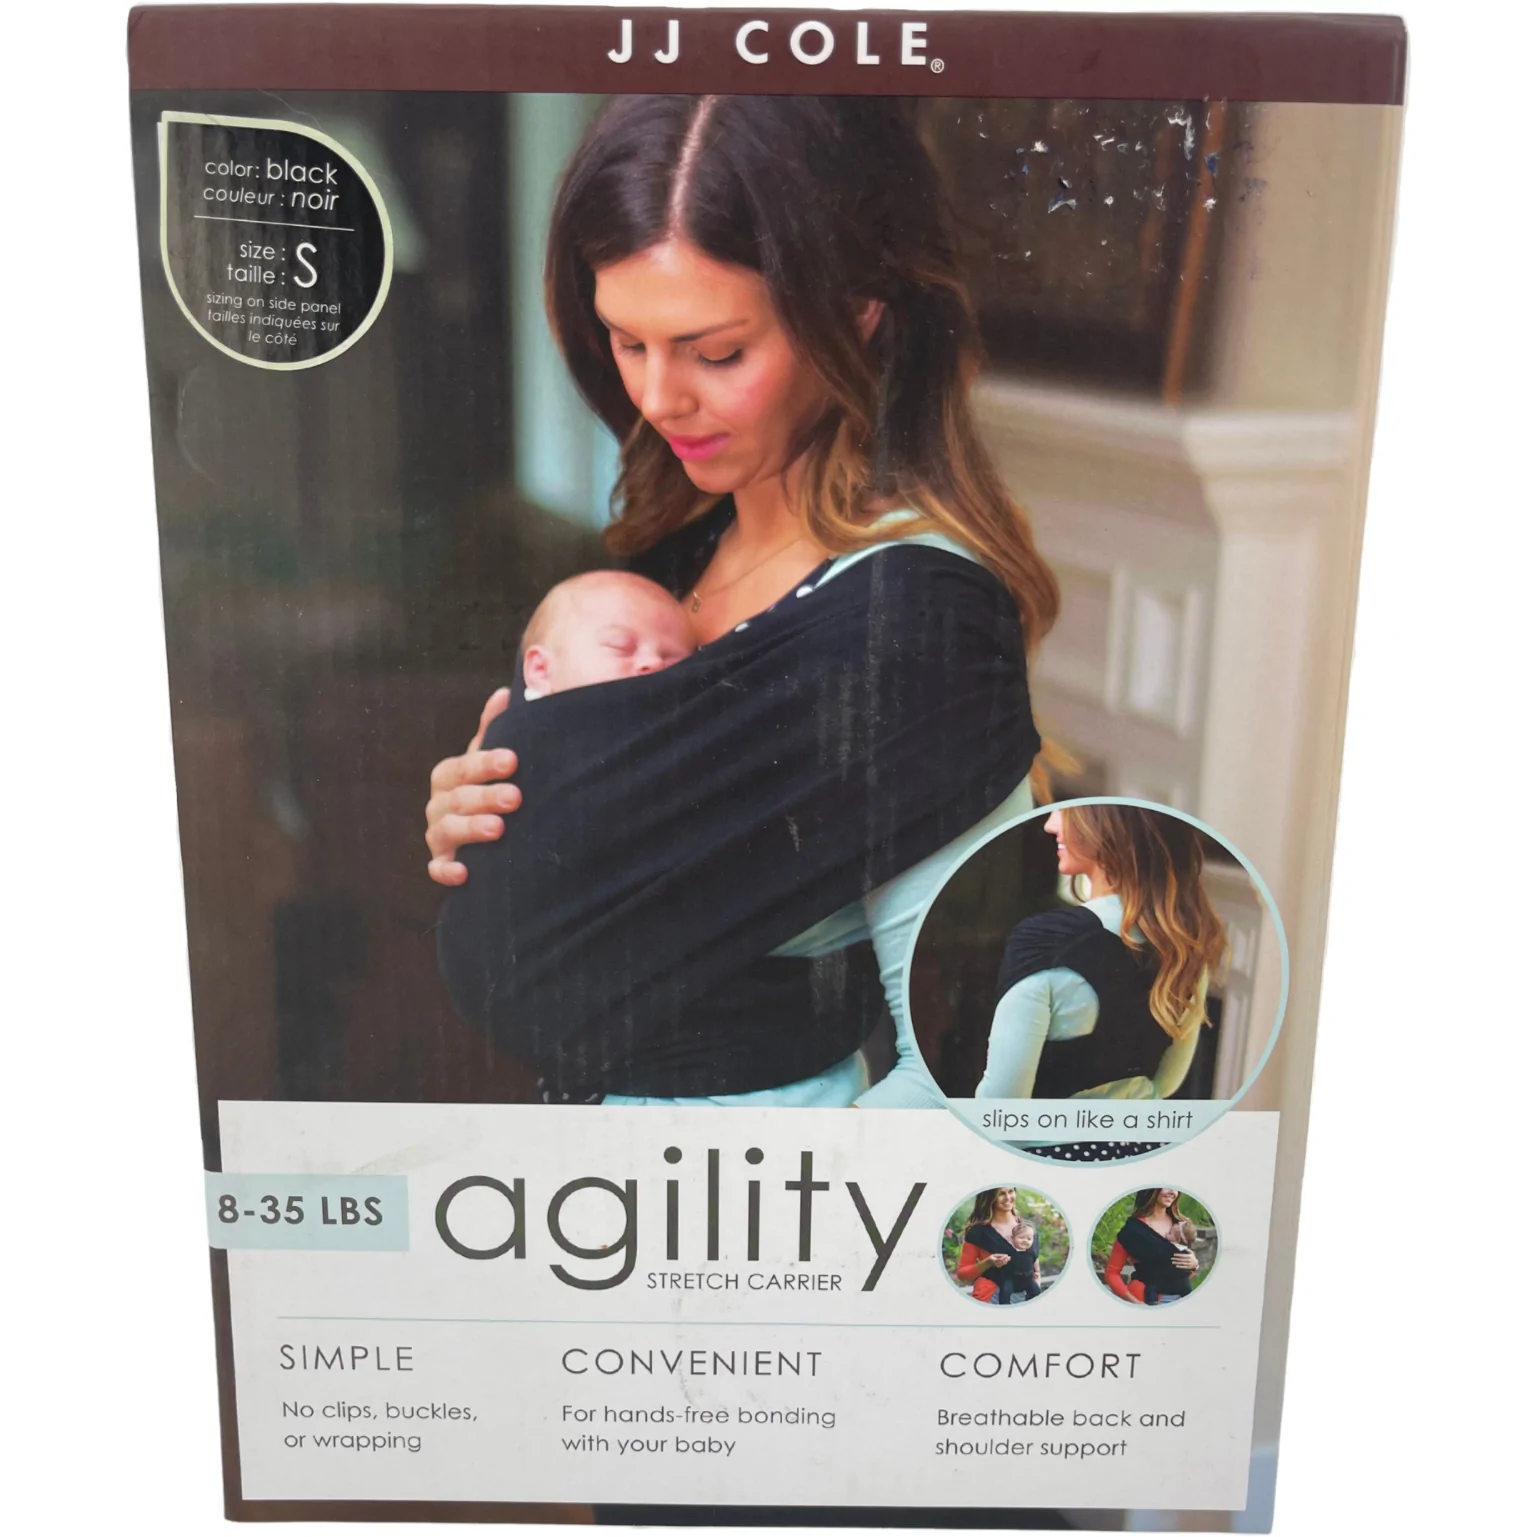 JJ Cole Agility Baby Carrier / Stretch Carrier / Black / Size Small / 8-35lbs